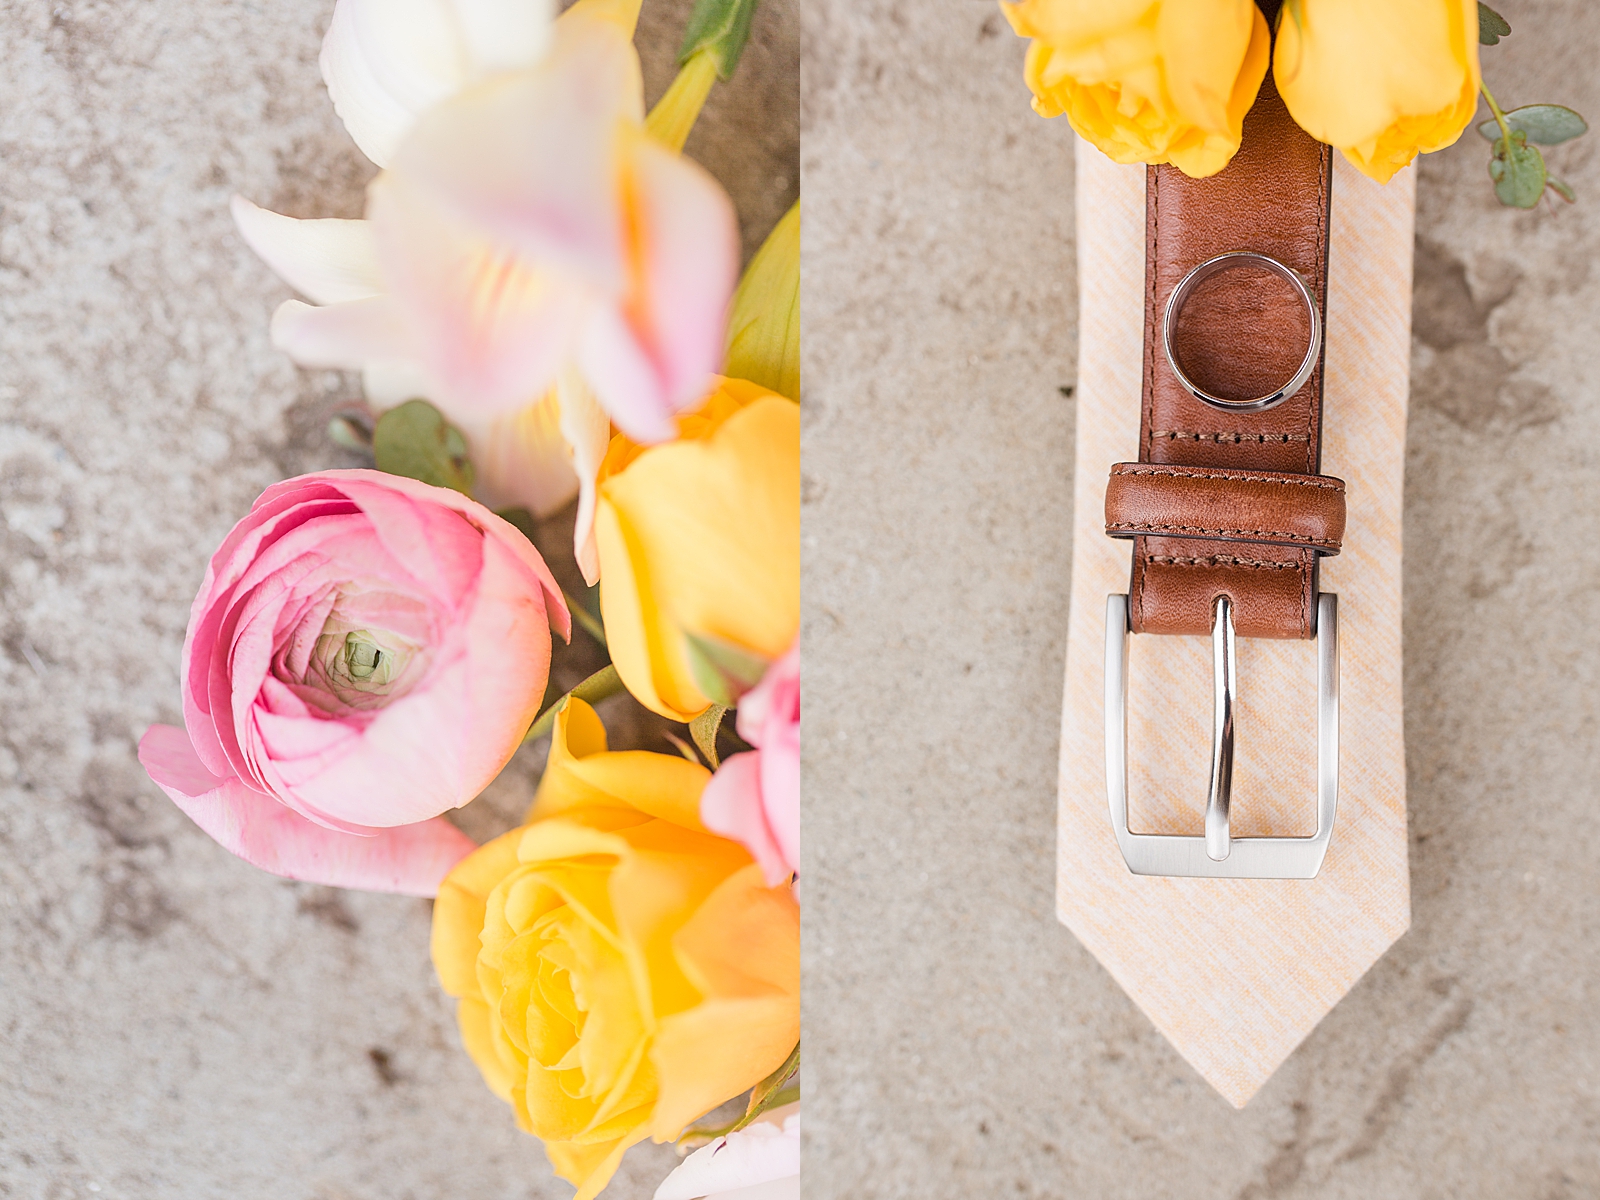 Hackney Warehouse Wedding Pink and Yellow Flowers and Tie Belt and Ring on Concrete Floor Photos